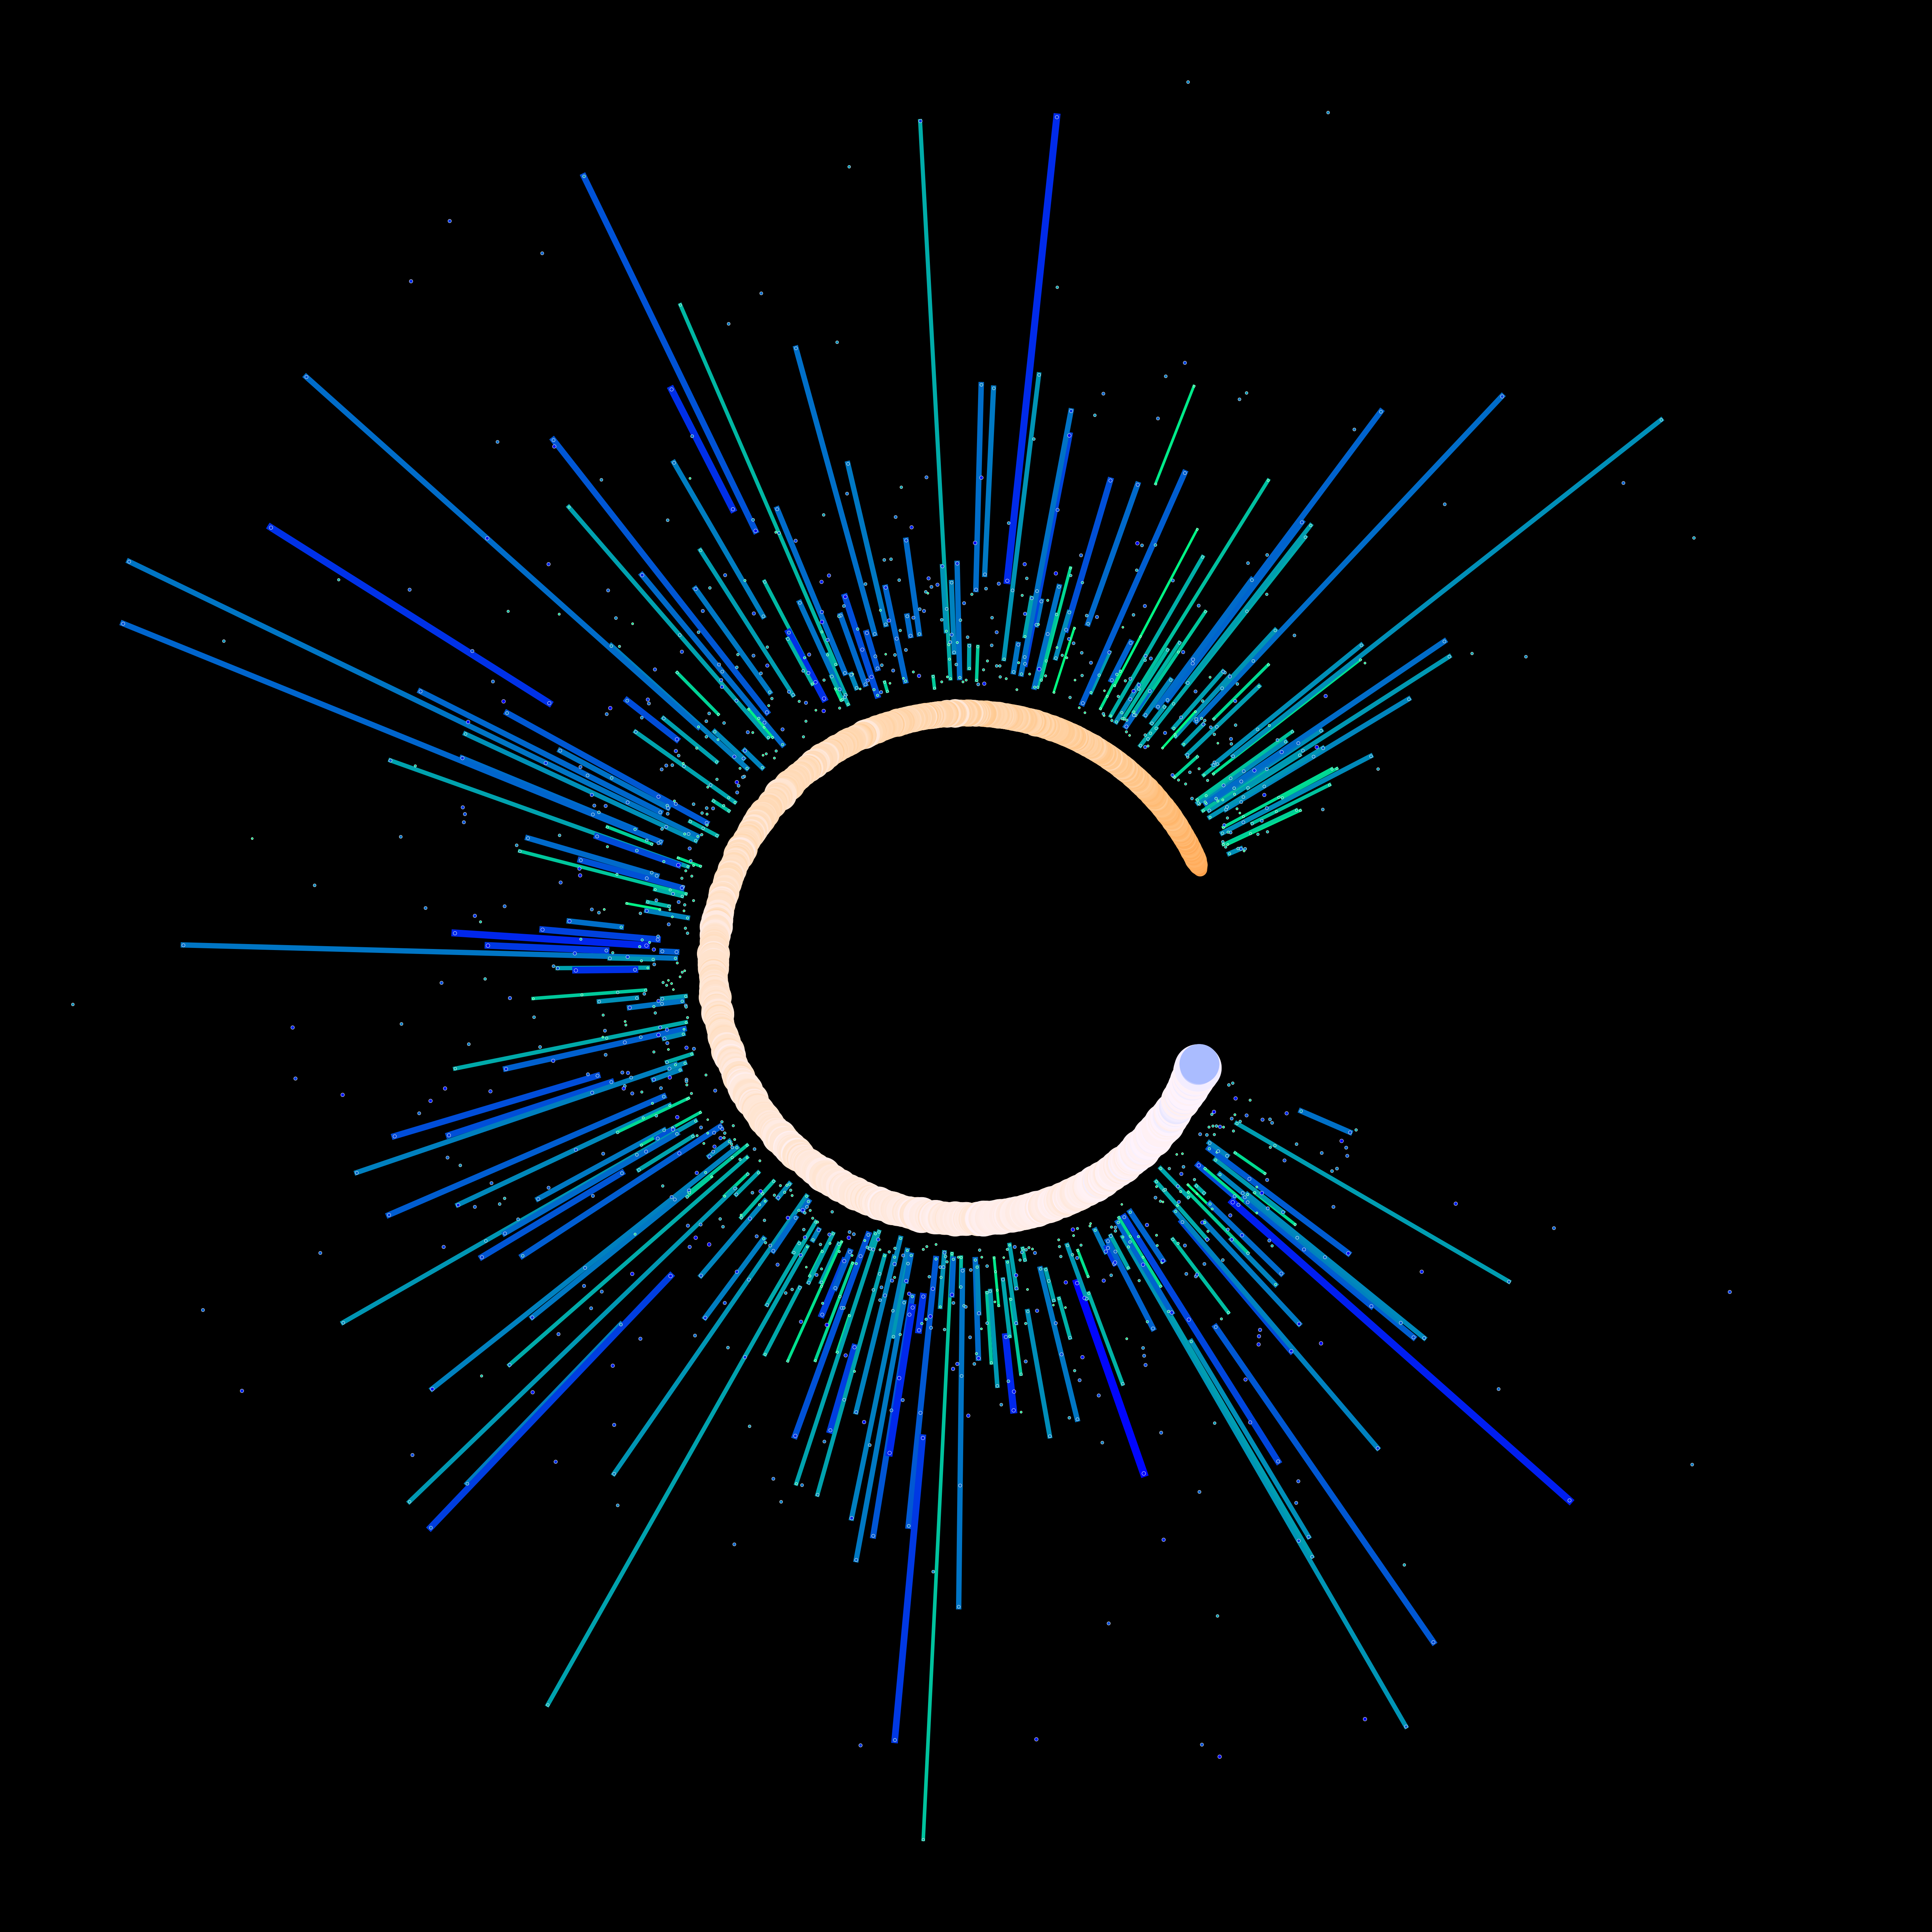 A ring of dots (representing stars) increasing in size, with colors changing from deep orange to white to light blue. Spanning outwards from some of these dots are bars with smaller dots inside them, representing the small planets (spaced by their semimajor axes) orbiting these stars. These dots are colored from green to blue depending on their radius, and the bars connecting them are the color-average of their radii.